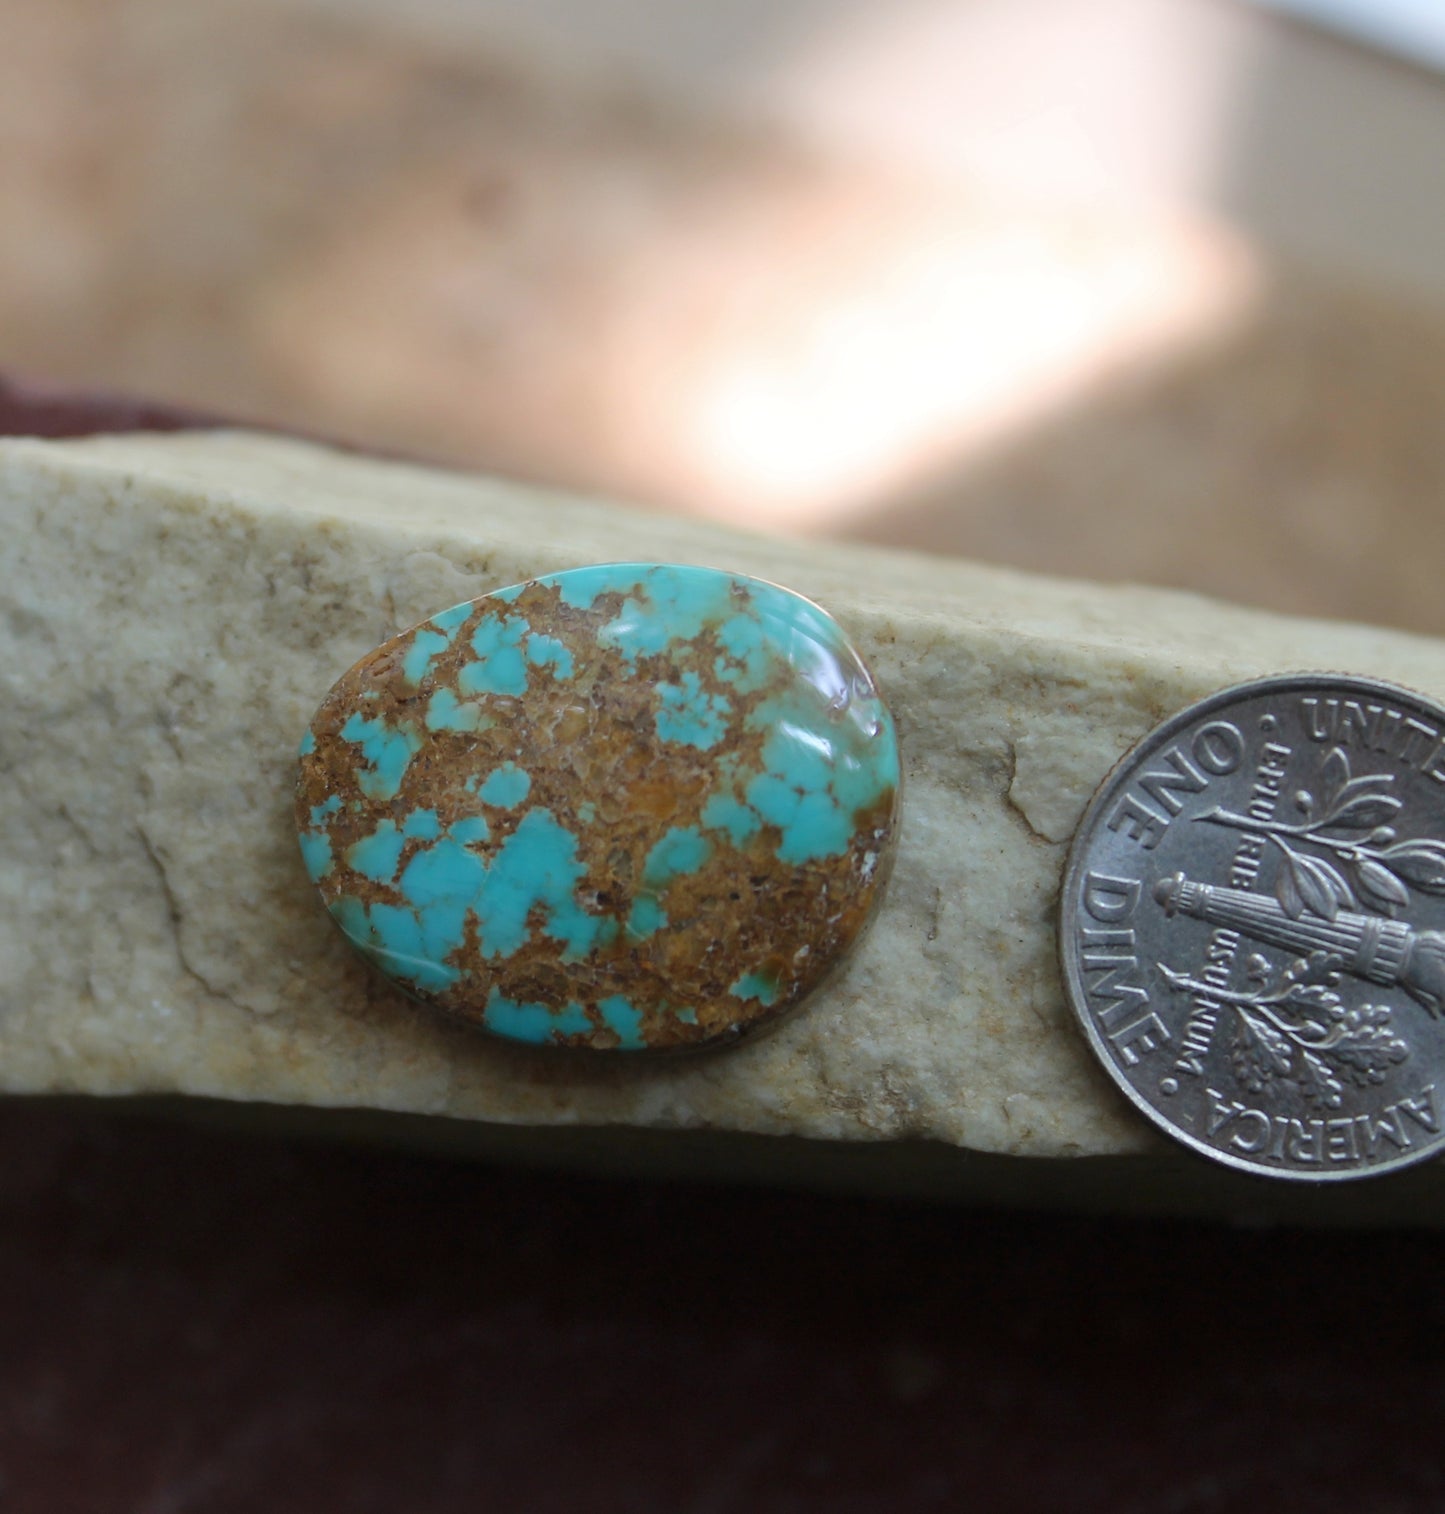 14 carat blue Stone Mountain Turquoise cabochon with red matrix